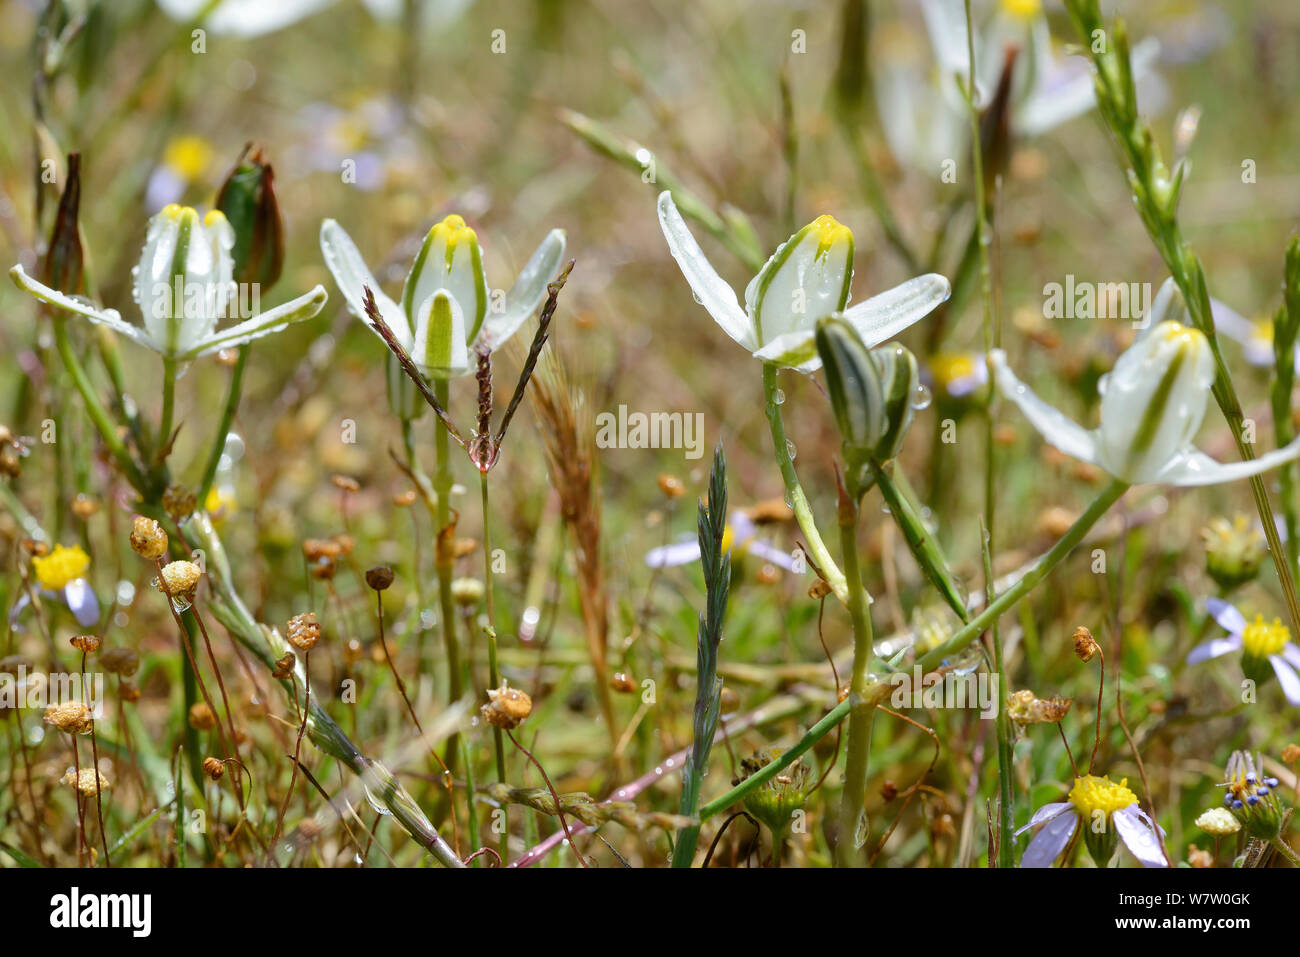 Slime lily (Albuca sp) flower. deHoop Nature Reserve, Western Cape, South Africa. Stock Photo